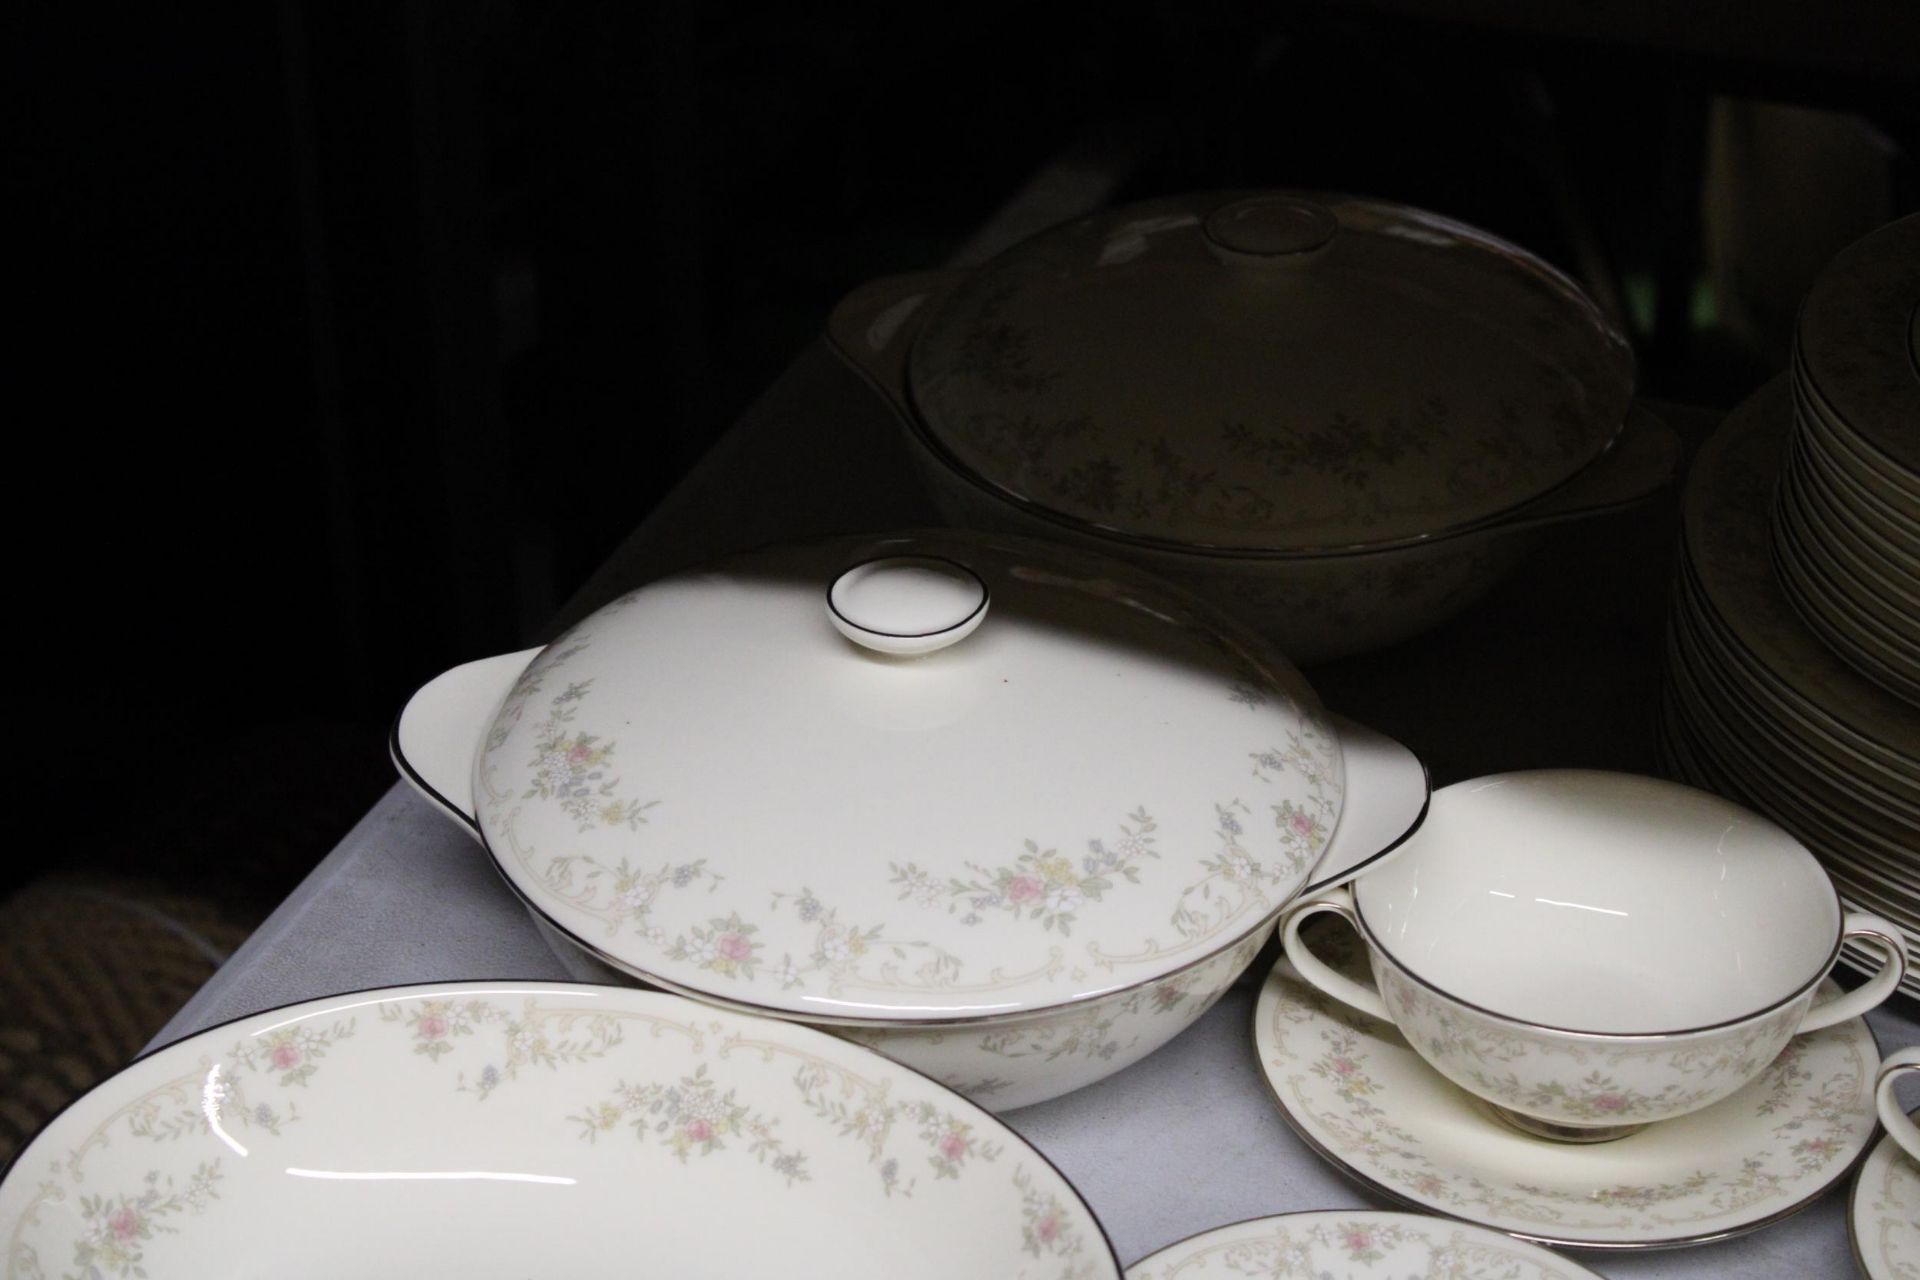 A ROYAL DOULTON 'DIANA' DINNER SERVICE TO INCLUDE SERVING TUREENS, VARIOUS SIZES OF PLATES, SOUP - Image 6 of 6